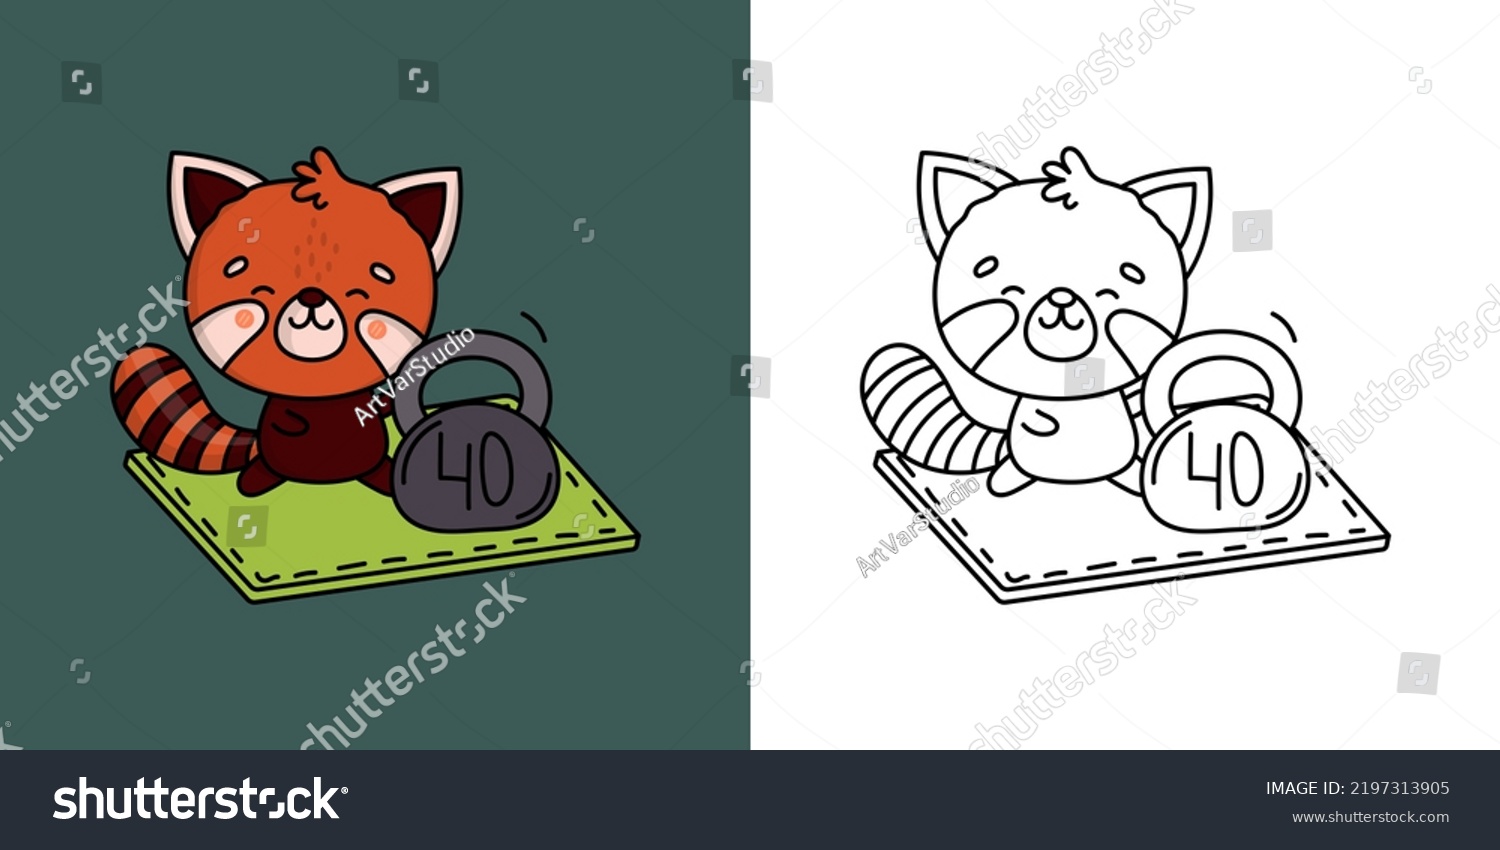 SVG of Cute Clipart Red Panda Sportsman Illustration and For Coloring Page. Cartoon Animal Sportsman. Vector Illustration of a Kawaii Animal for Stickers, Baby Shower, Coloring Pages, Prints for Clothes.
 svg